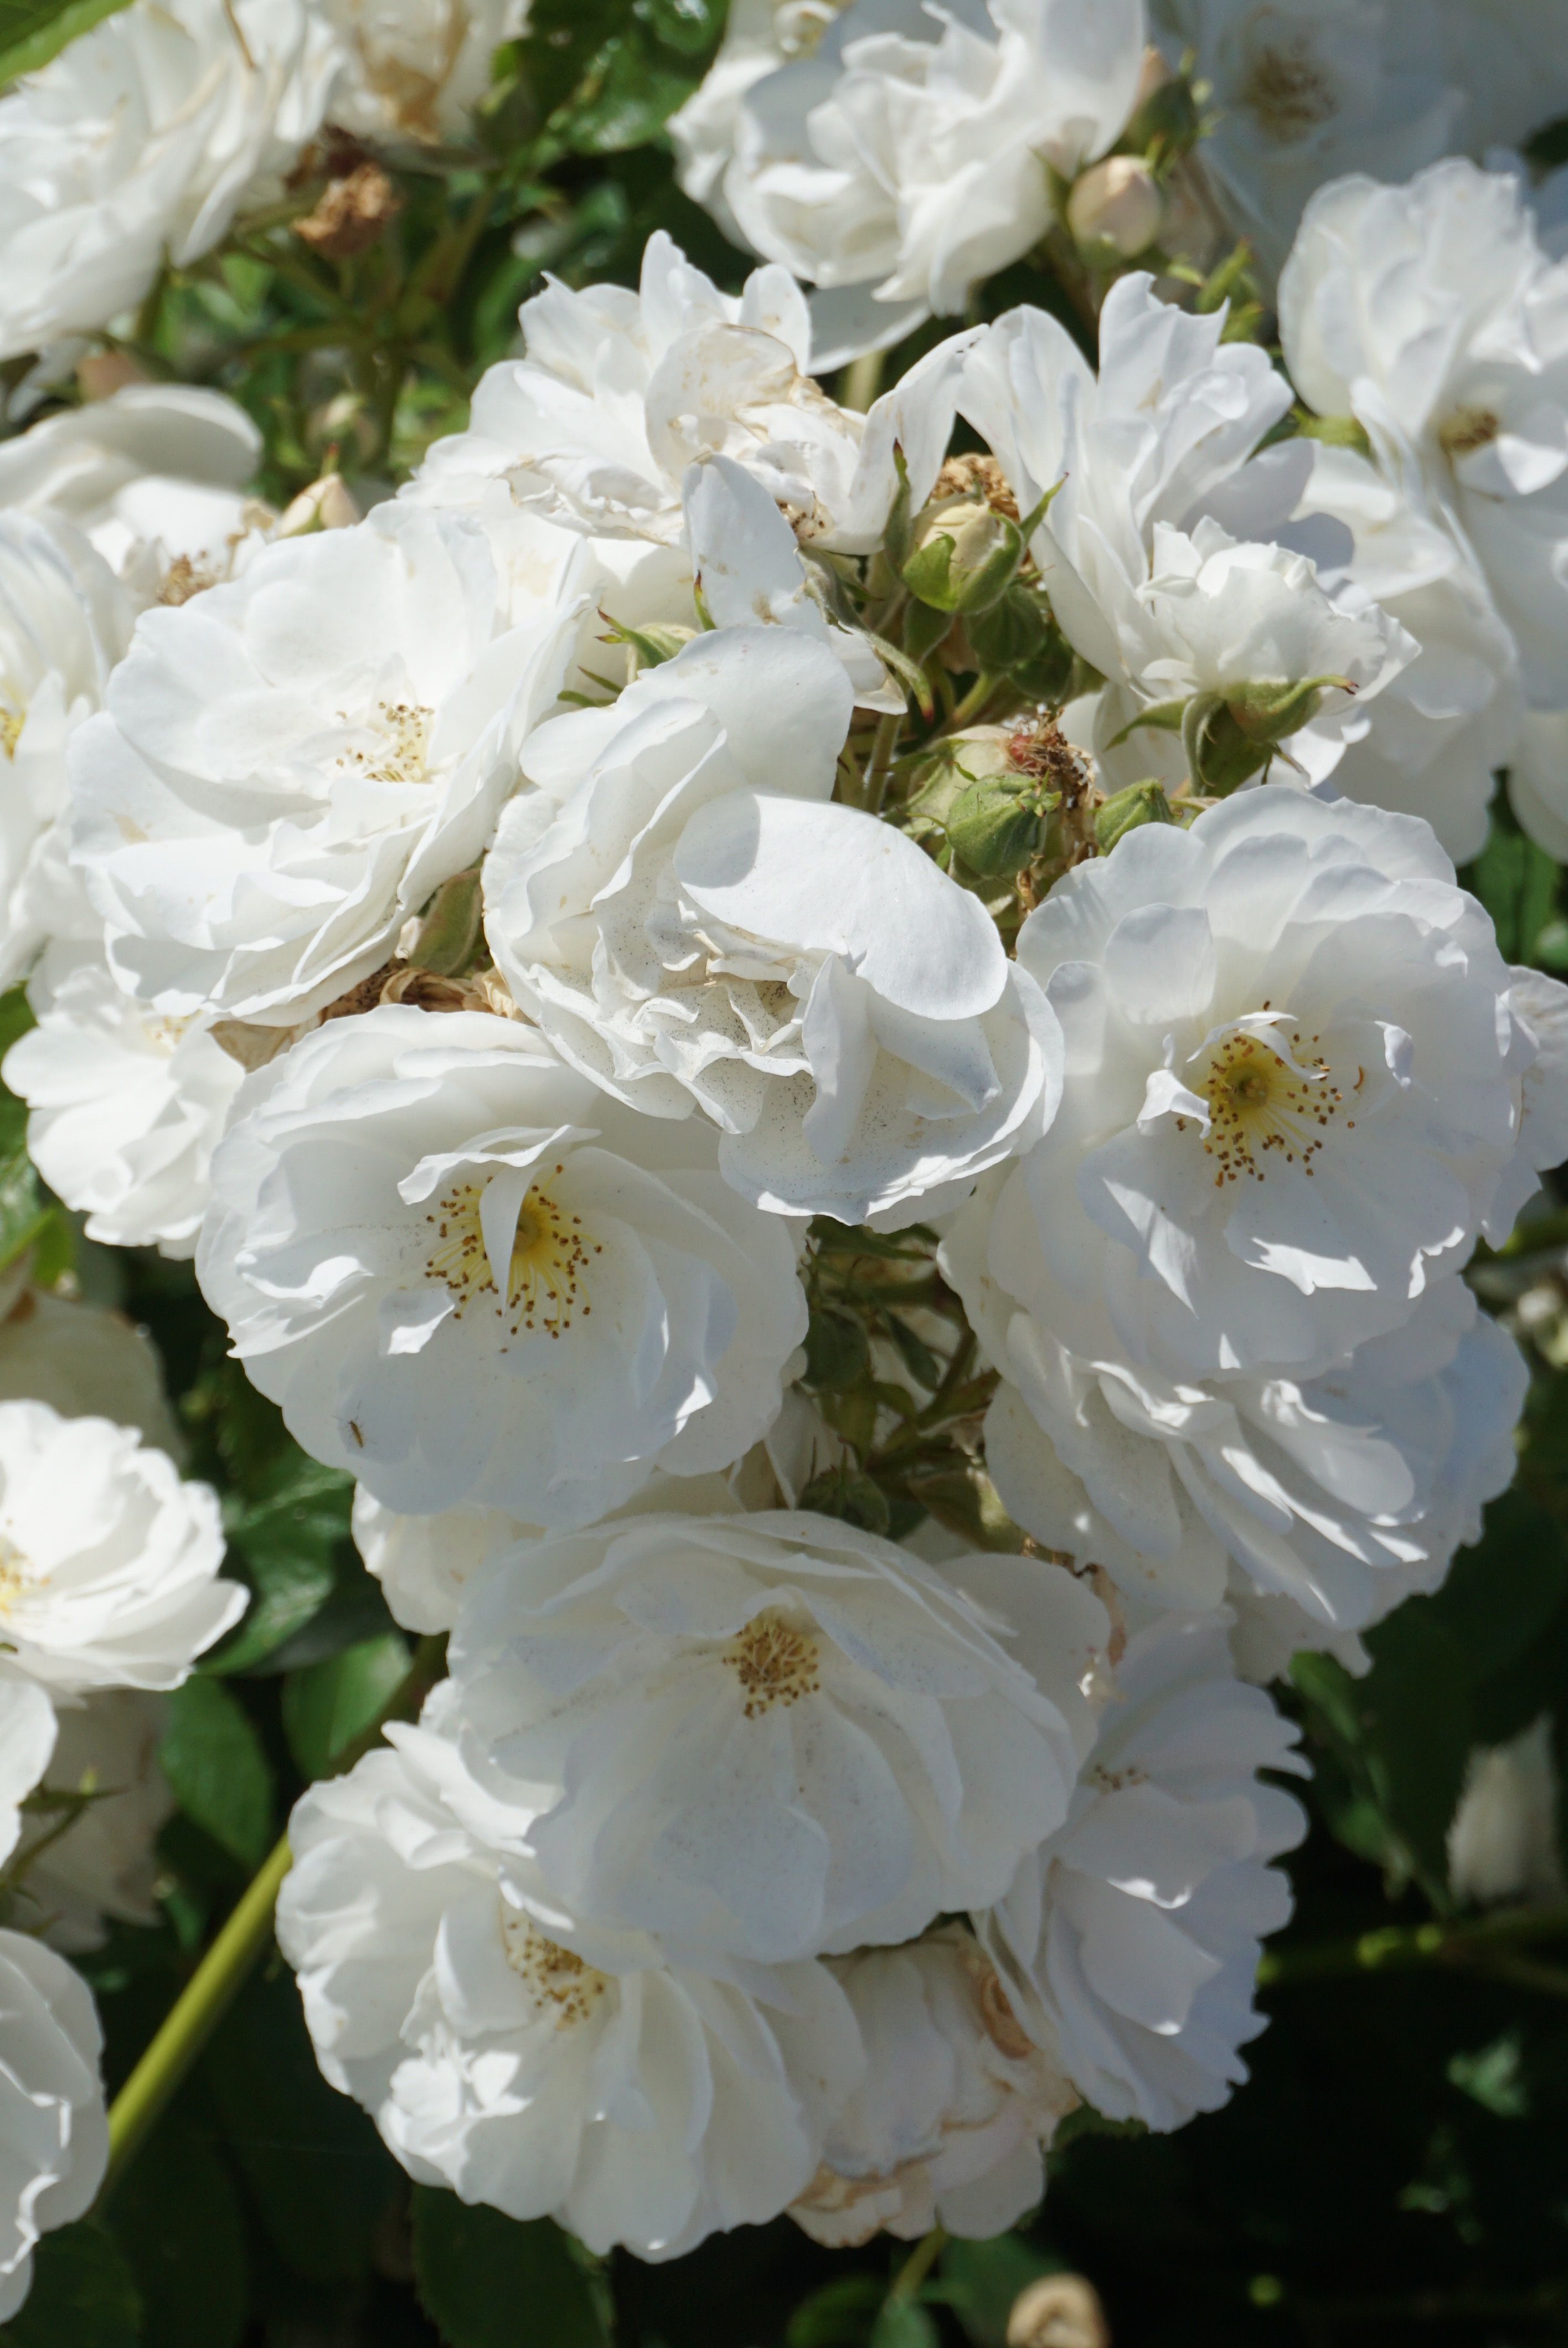 images/plants/rosa/ros-nitty-gritty-white/ros-nitty-gritty-white-0008.jpg